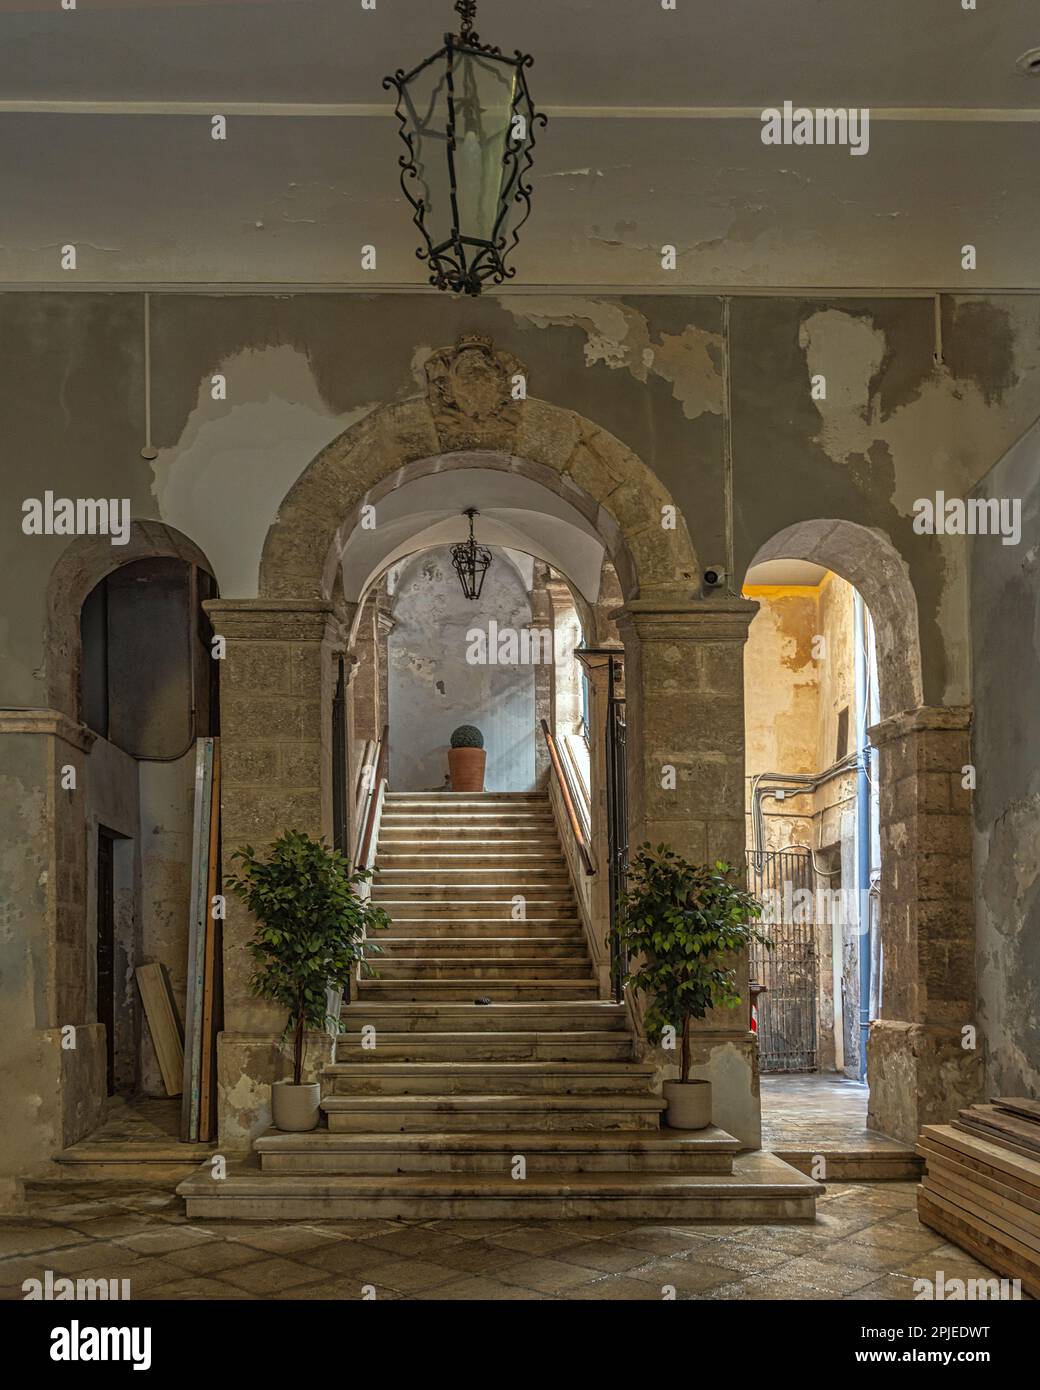 Central staircase of the internal courtyard of the historic building of Palazzo Beneventano Del Bosco in Piazza Duomo in Syracuse. Syracuse, Sicily, Stock Photo